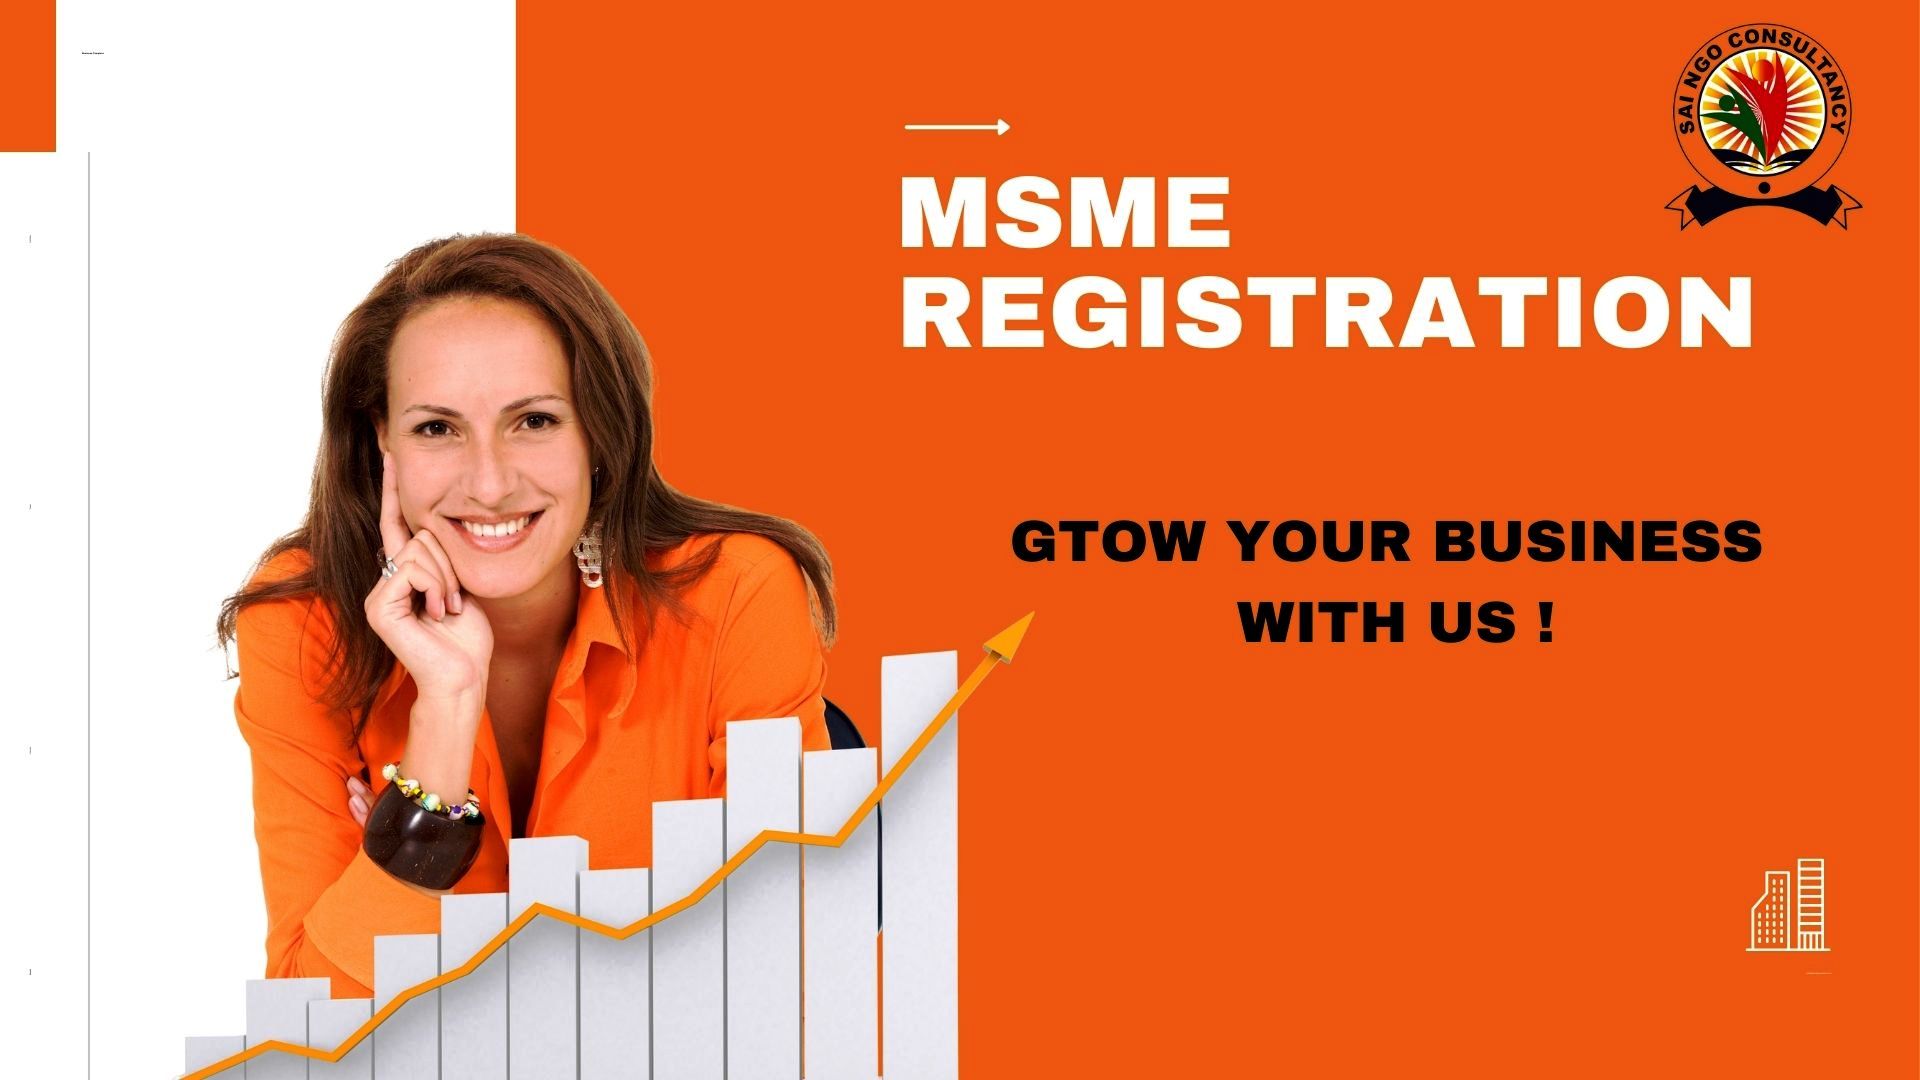 You are currently viewing Msme Registration & Full Form of MSME: Everything You Need to Know About Joining a Small Business.(Udayam Aadhar Udyog Aadhar Registration)